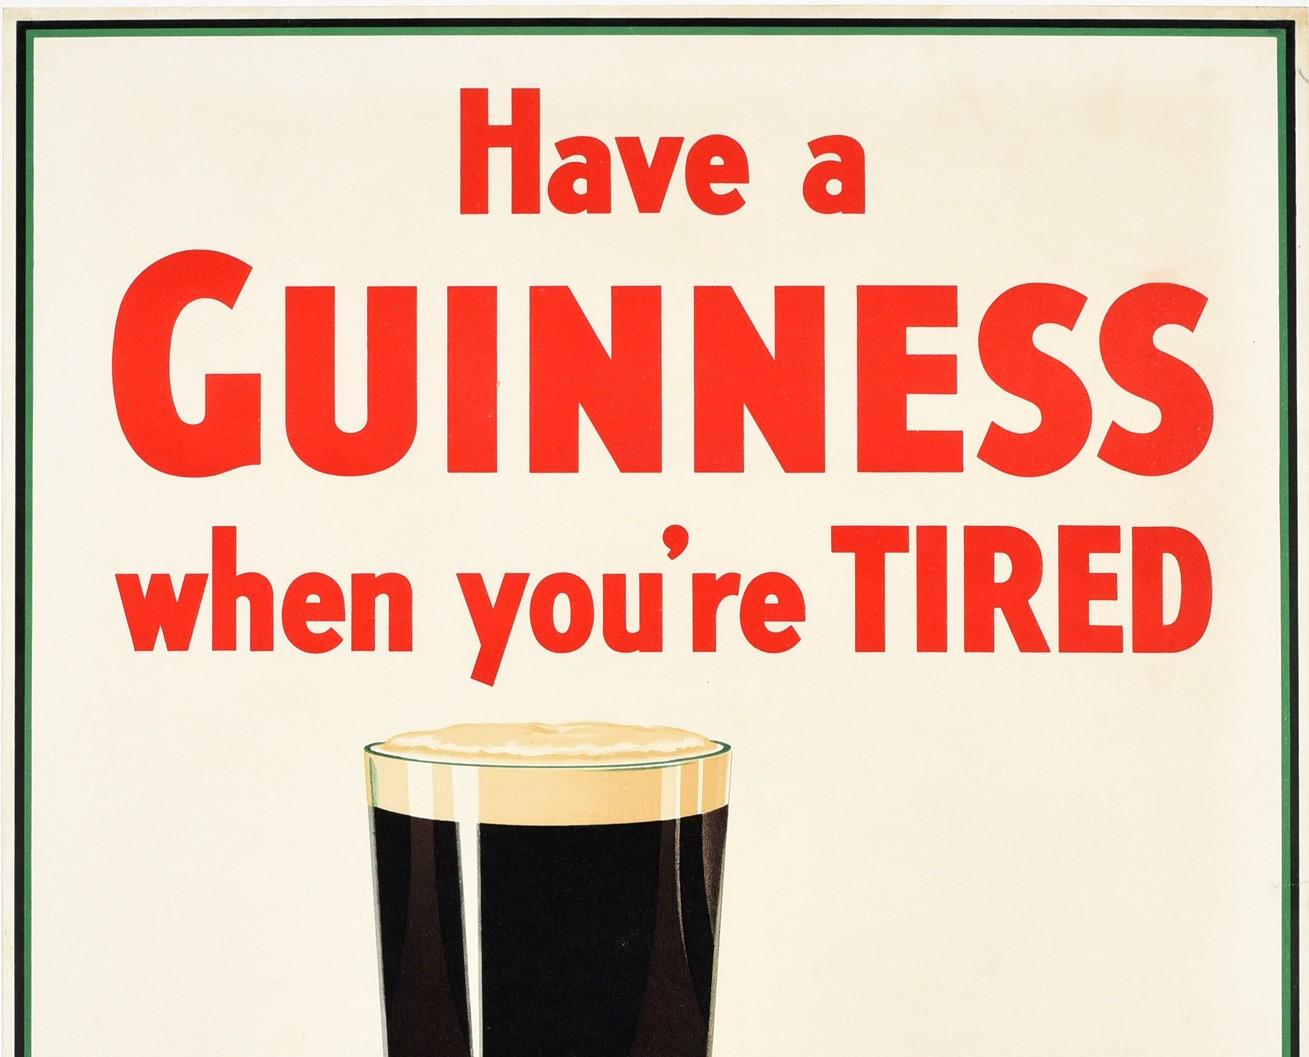 Original vintage advertising poster for the iconic drink Guinness Irish stout beer - Have a Guinness when you're tired - featuring a smiling turtle carrying a pint glass of Guinness on its shell with the bold red text above. One of the world's most